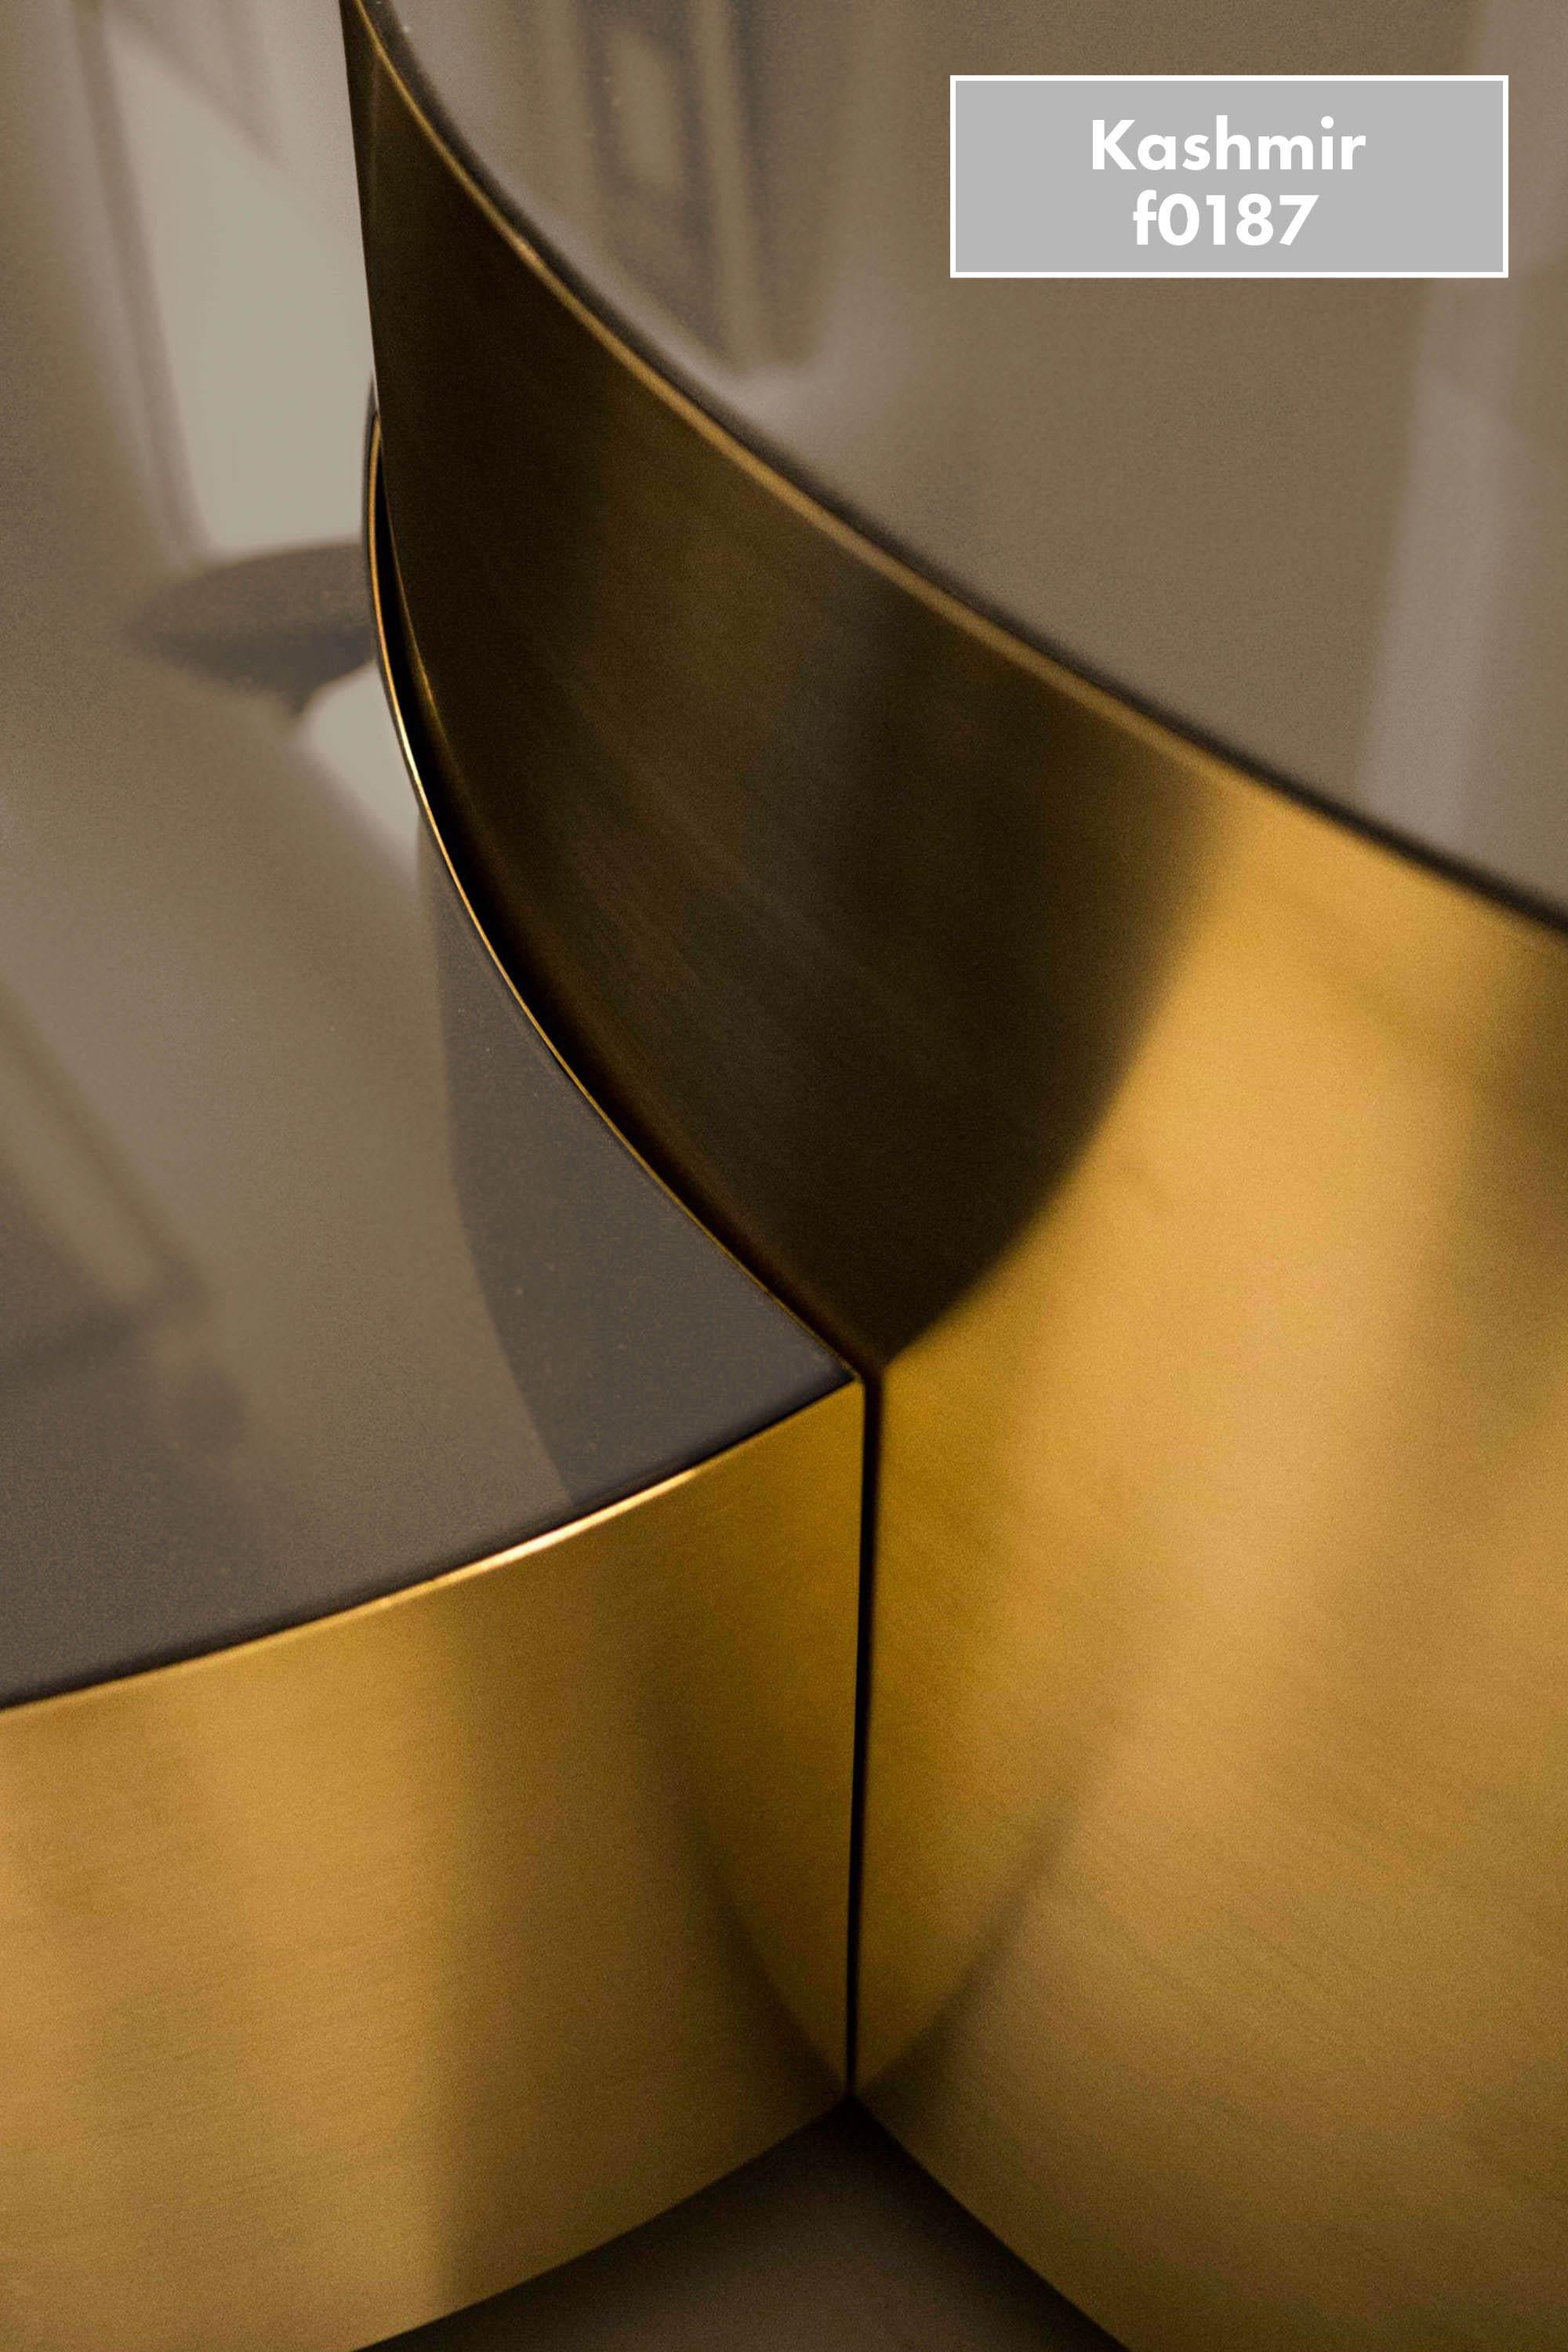 Set of Two Side Tables, Moon Shapes, Brass & HighGloss Laminate, Handcrafted - L For Sale 3